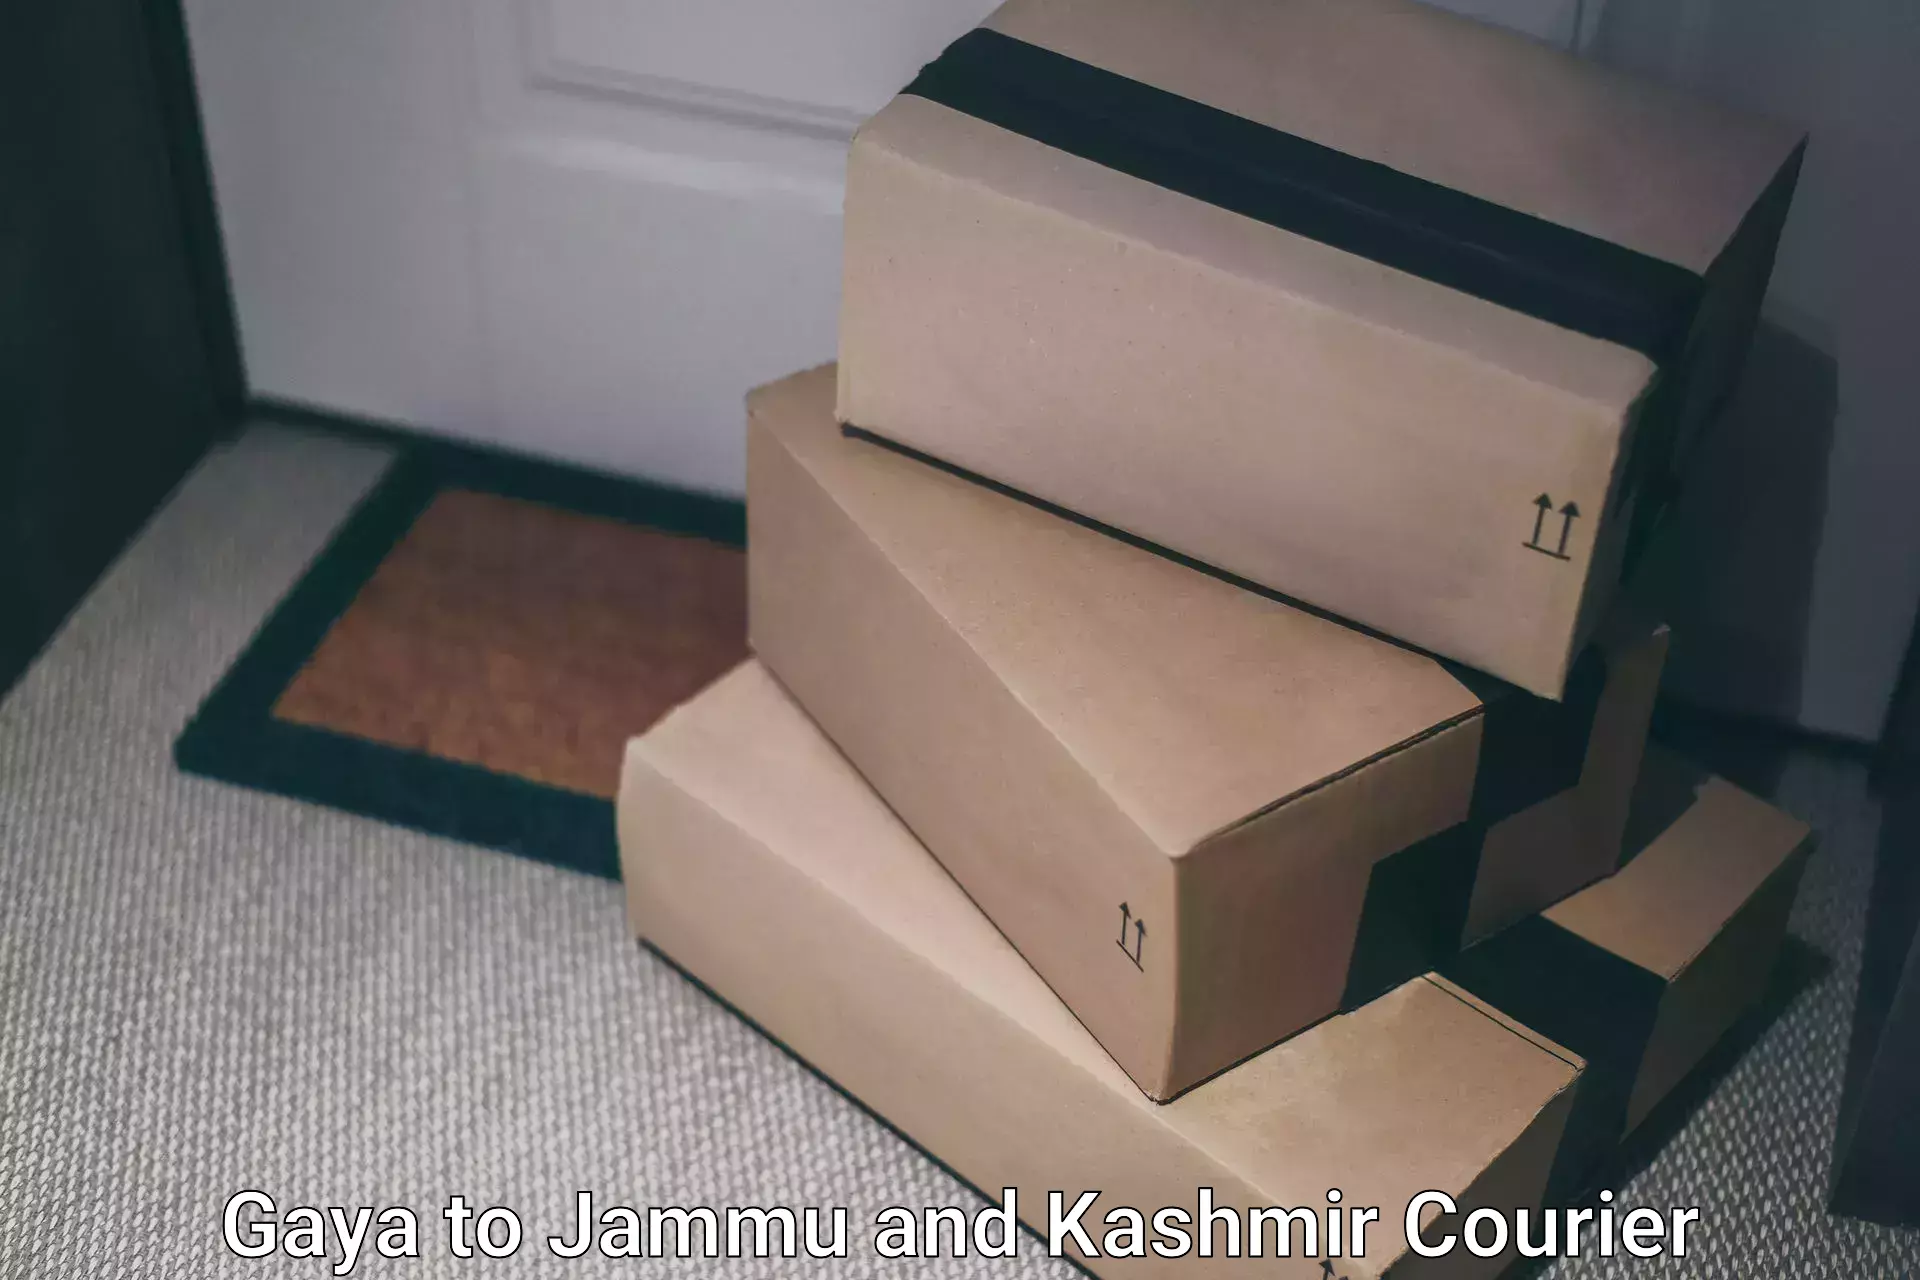 High-speed delivery in Gaya to University of Jammu